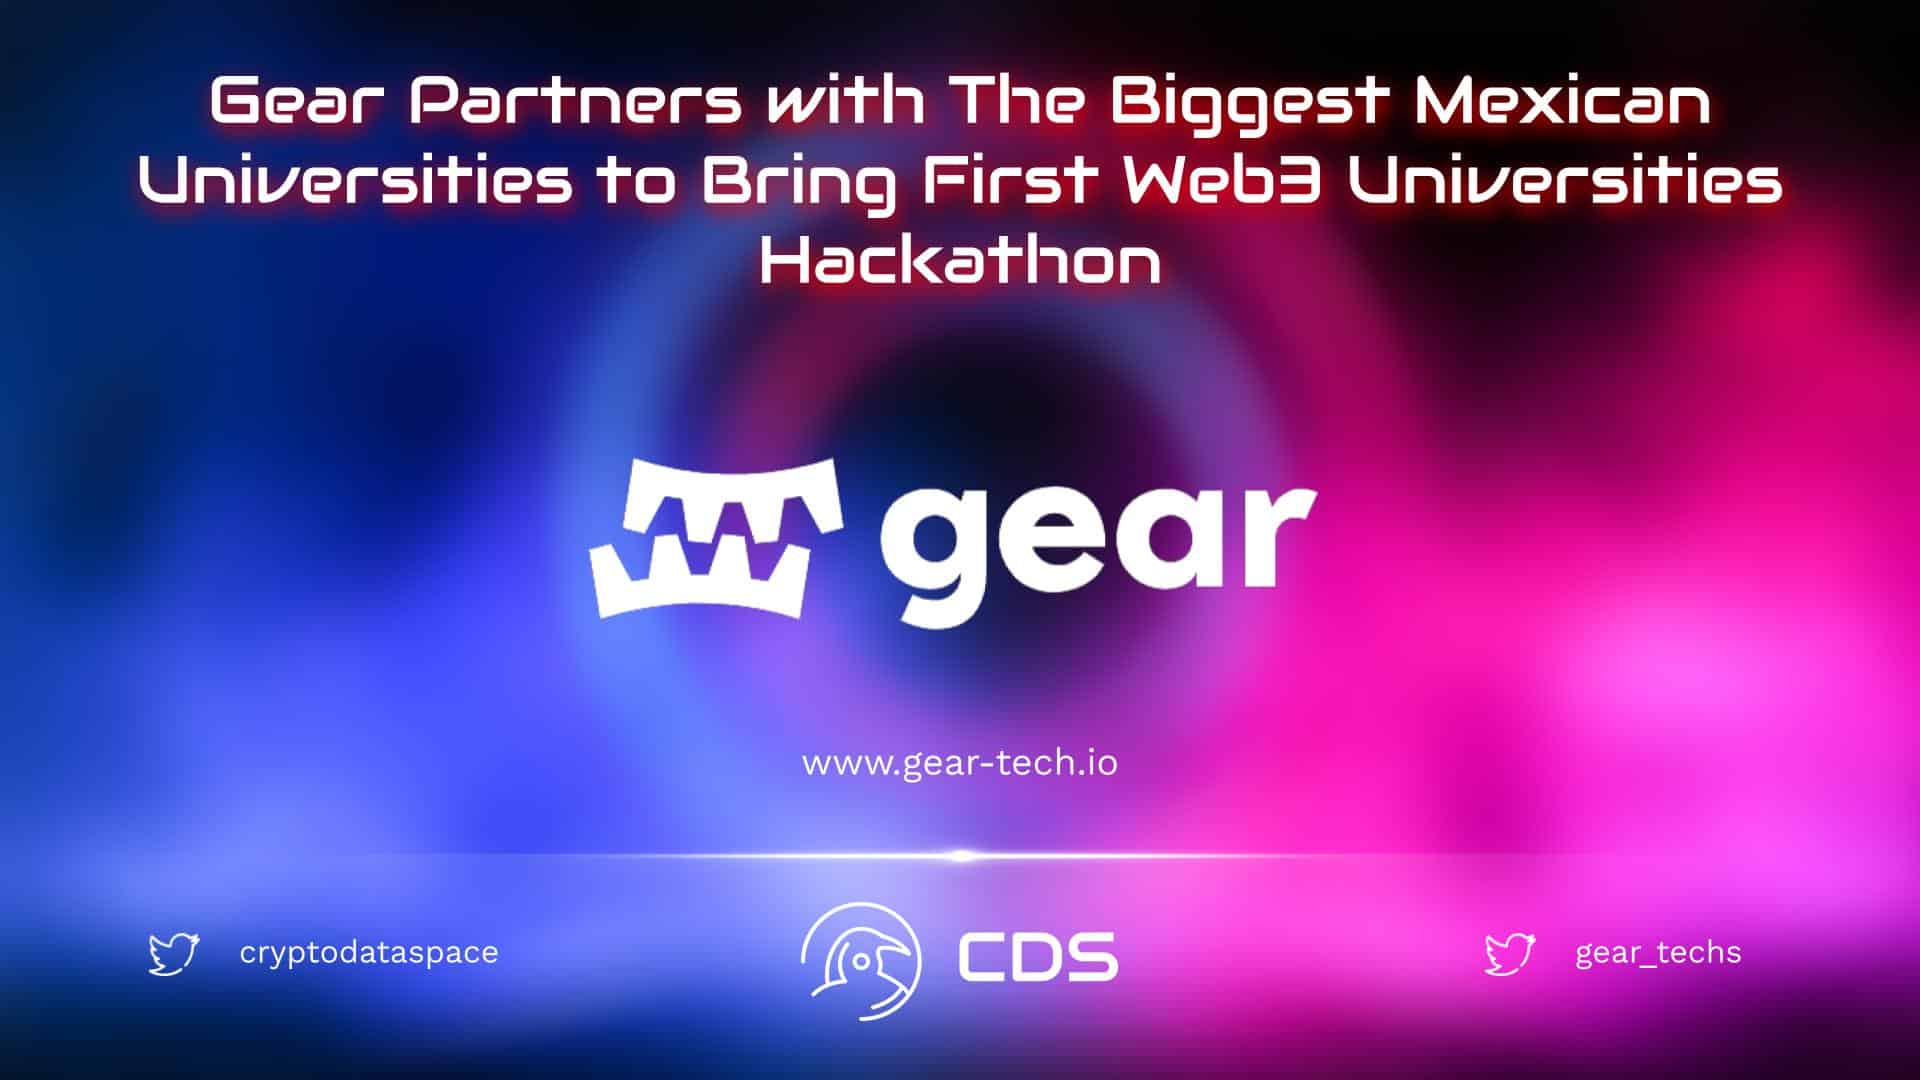 Gear Partners with The Biggest Mexican Universities to Bring First Web3 Universities Hackathon